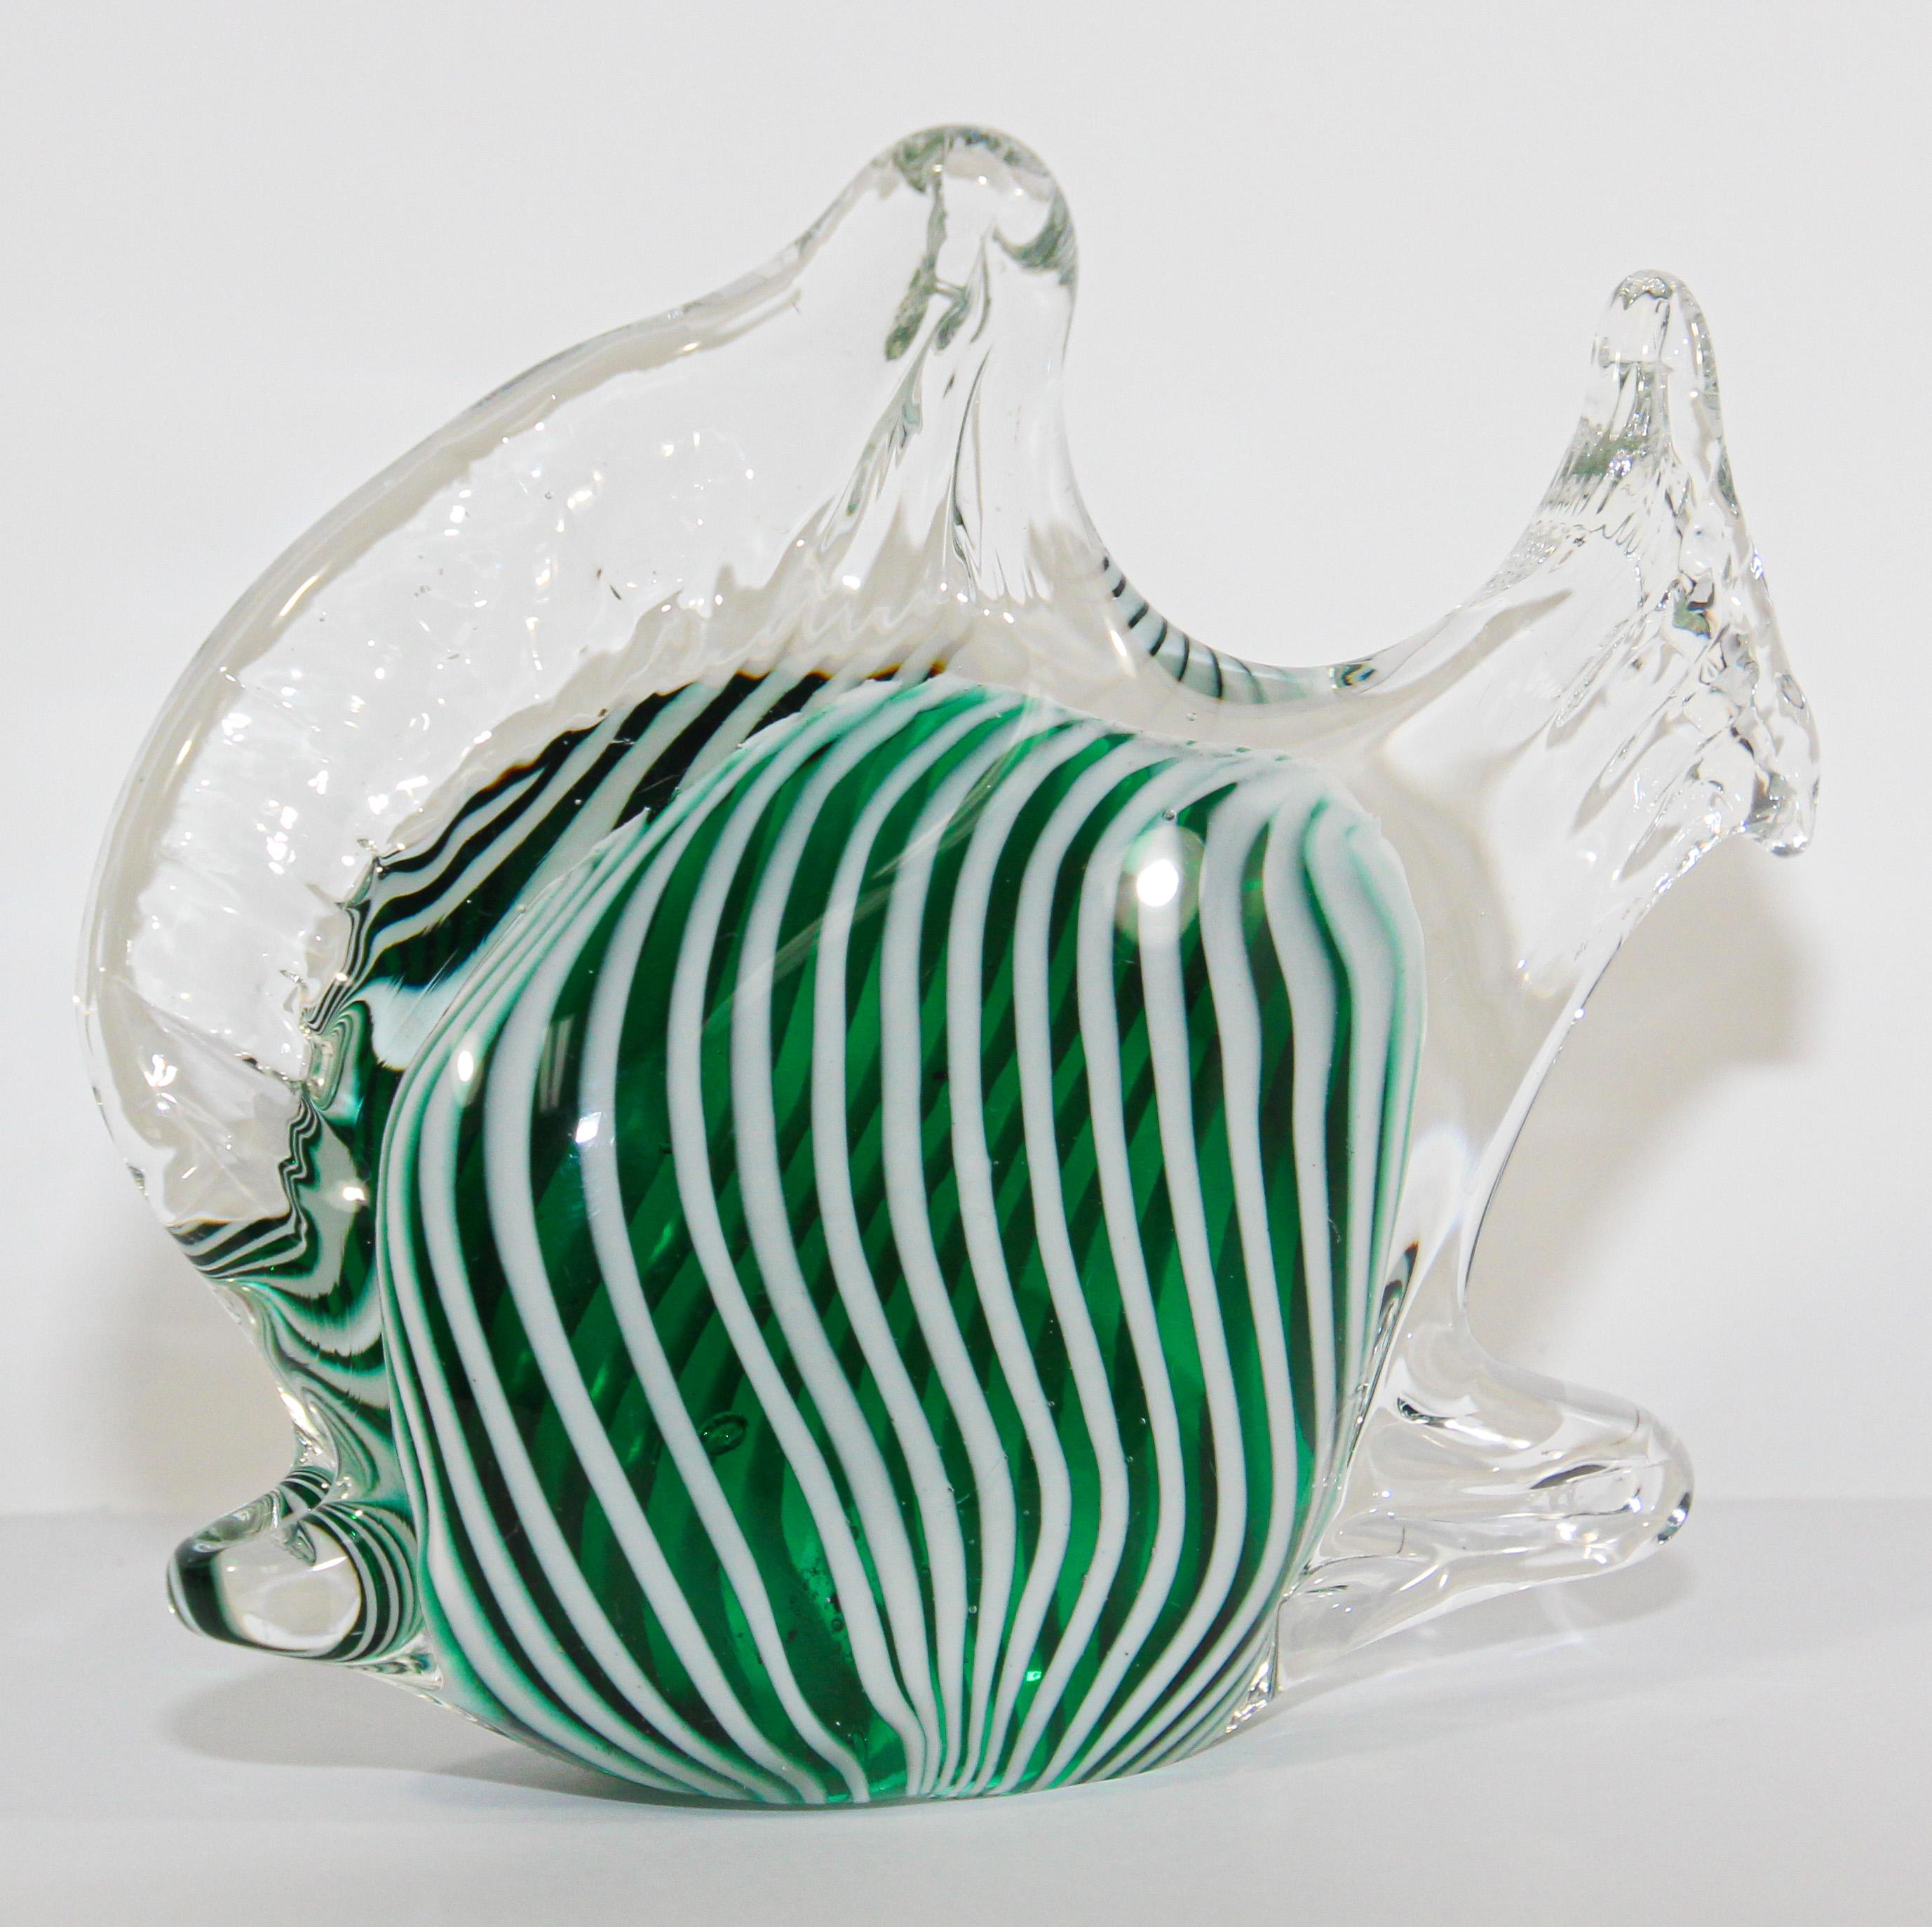 Vintage Murano art glass hand blown sculpture of a fish in green and white stripes colored glass figurine.
Handcrafted beautiful Post Modern hand blown art glass fish Italian decorated in clear, white and green.
Measures: 6